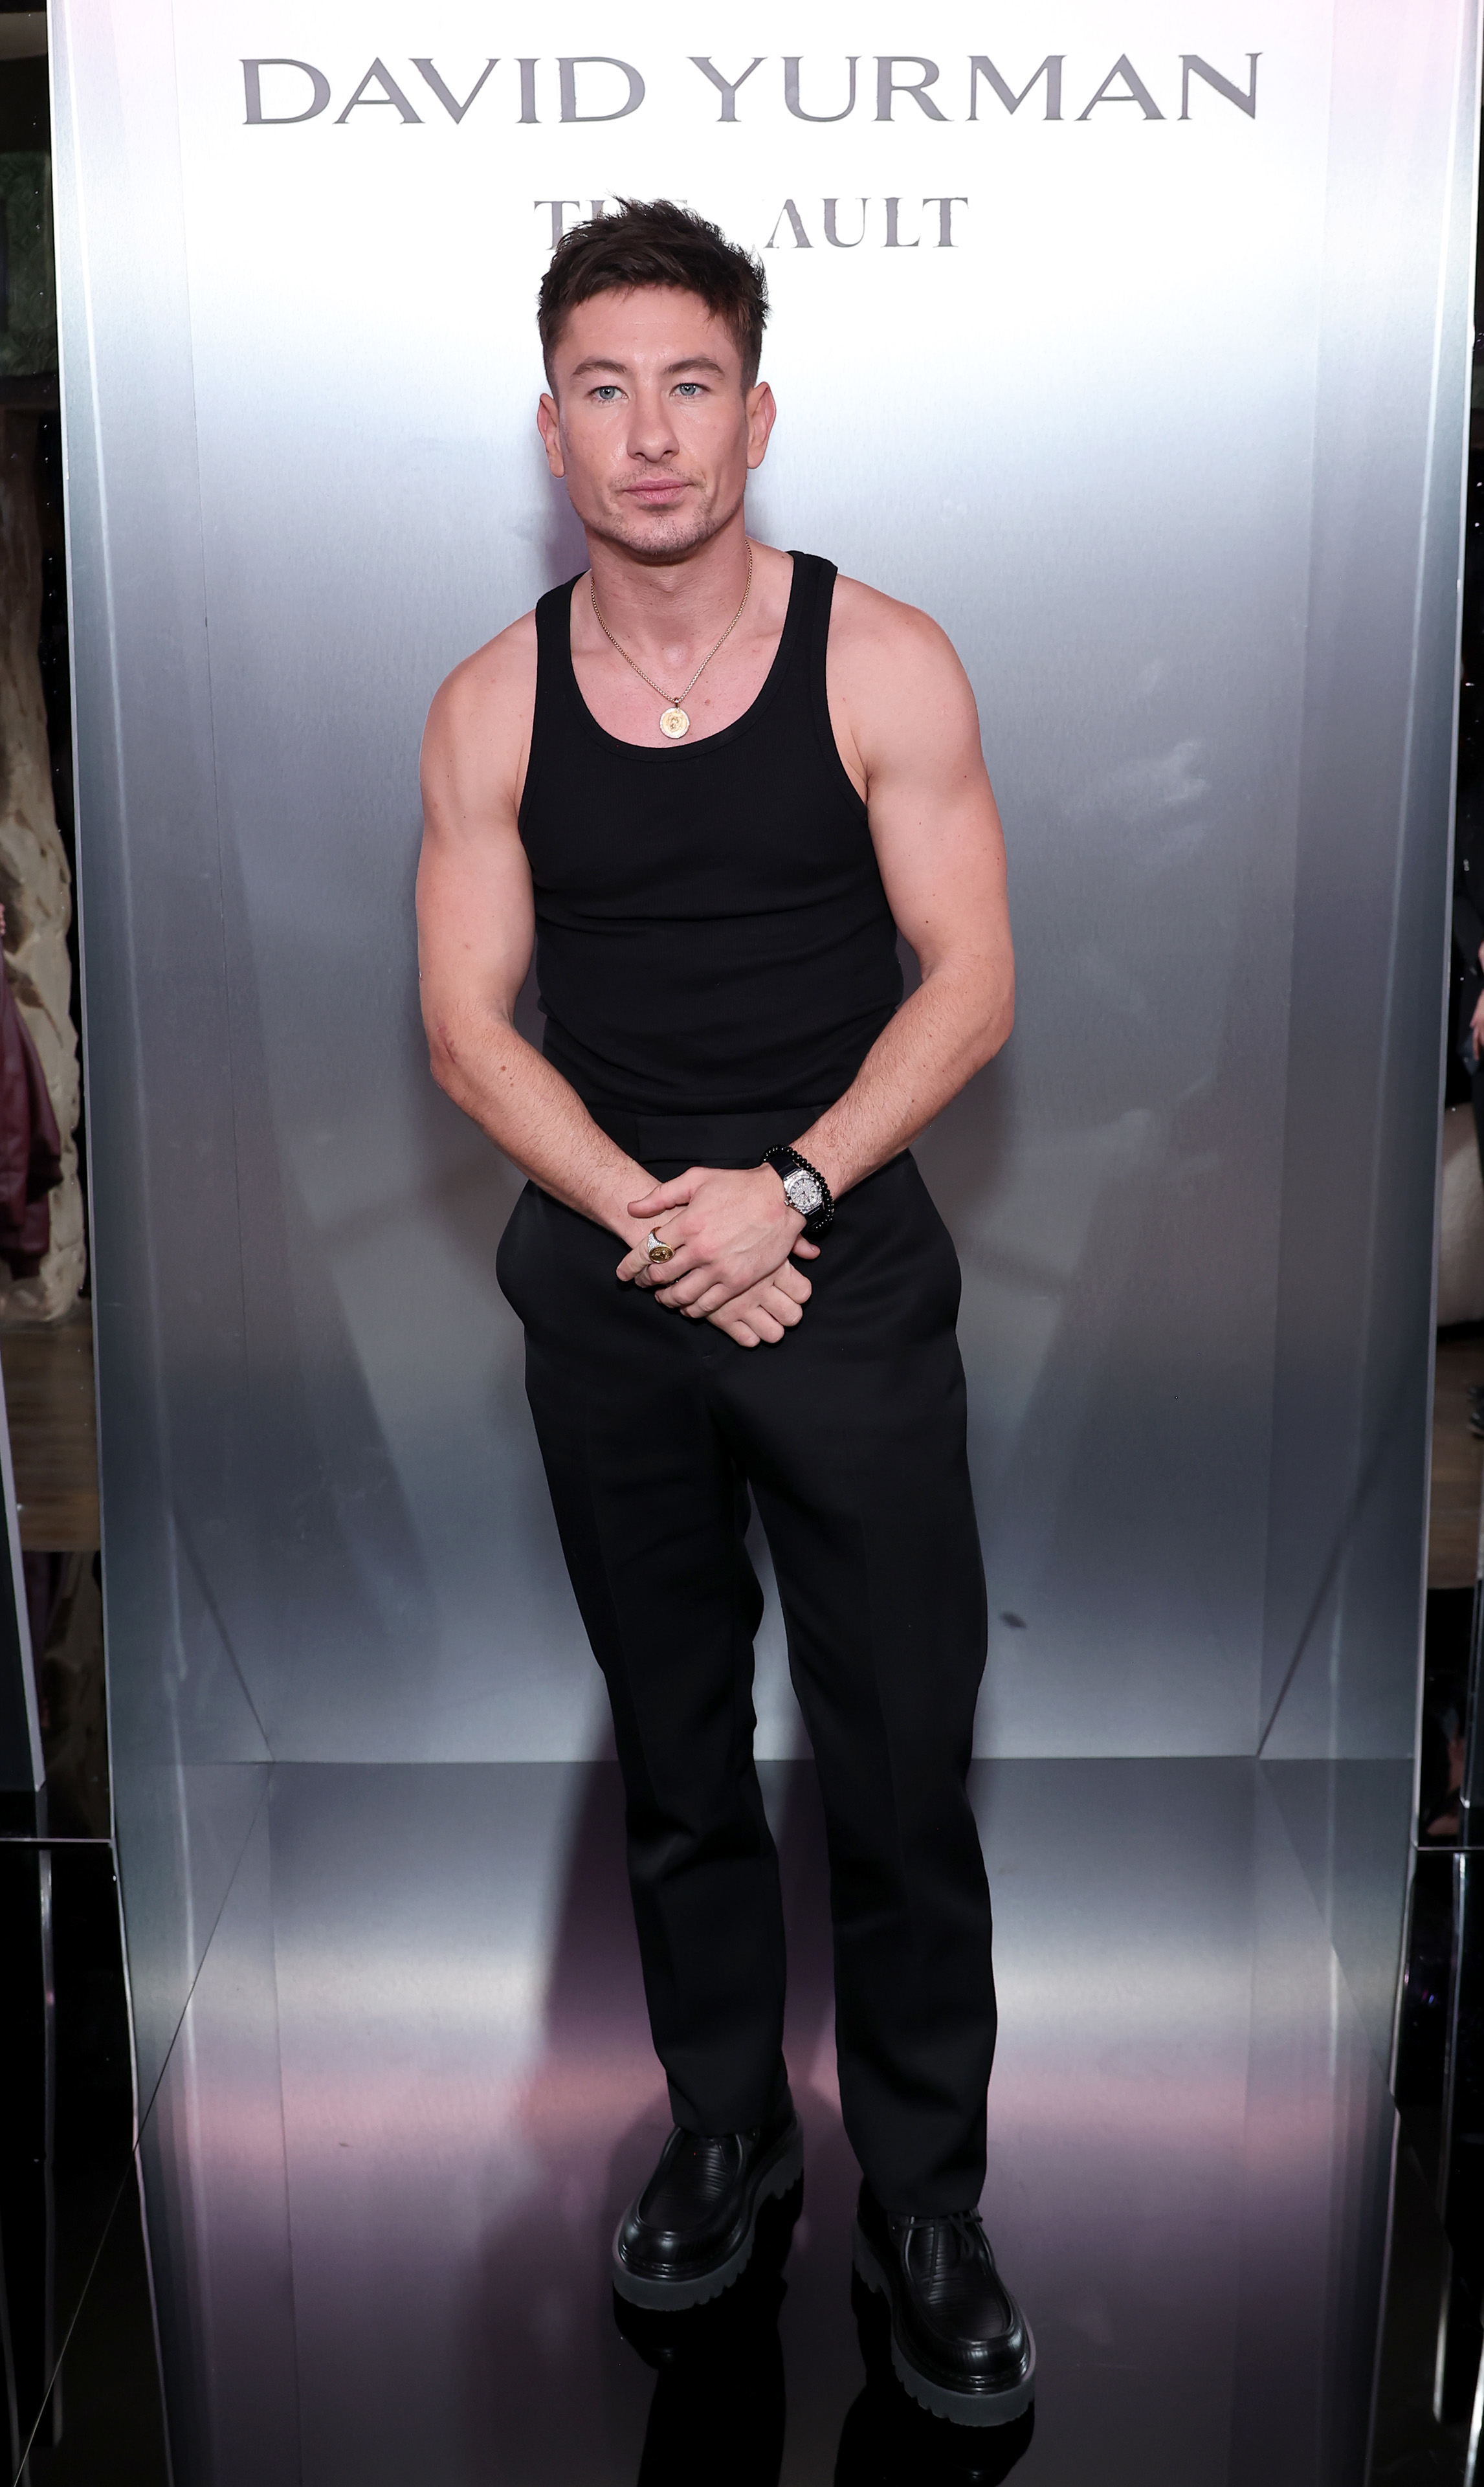 Barry Keoghan at an event wearing a sleeveless shirt and pants